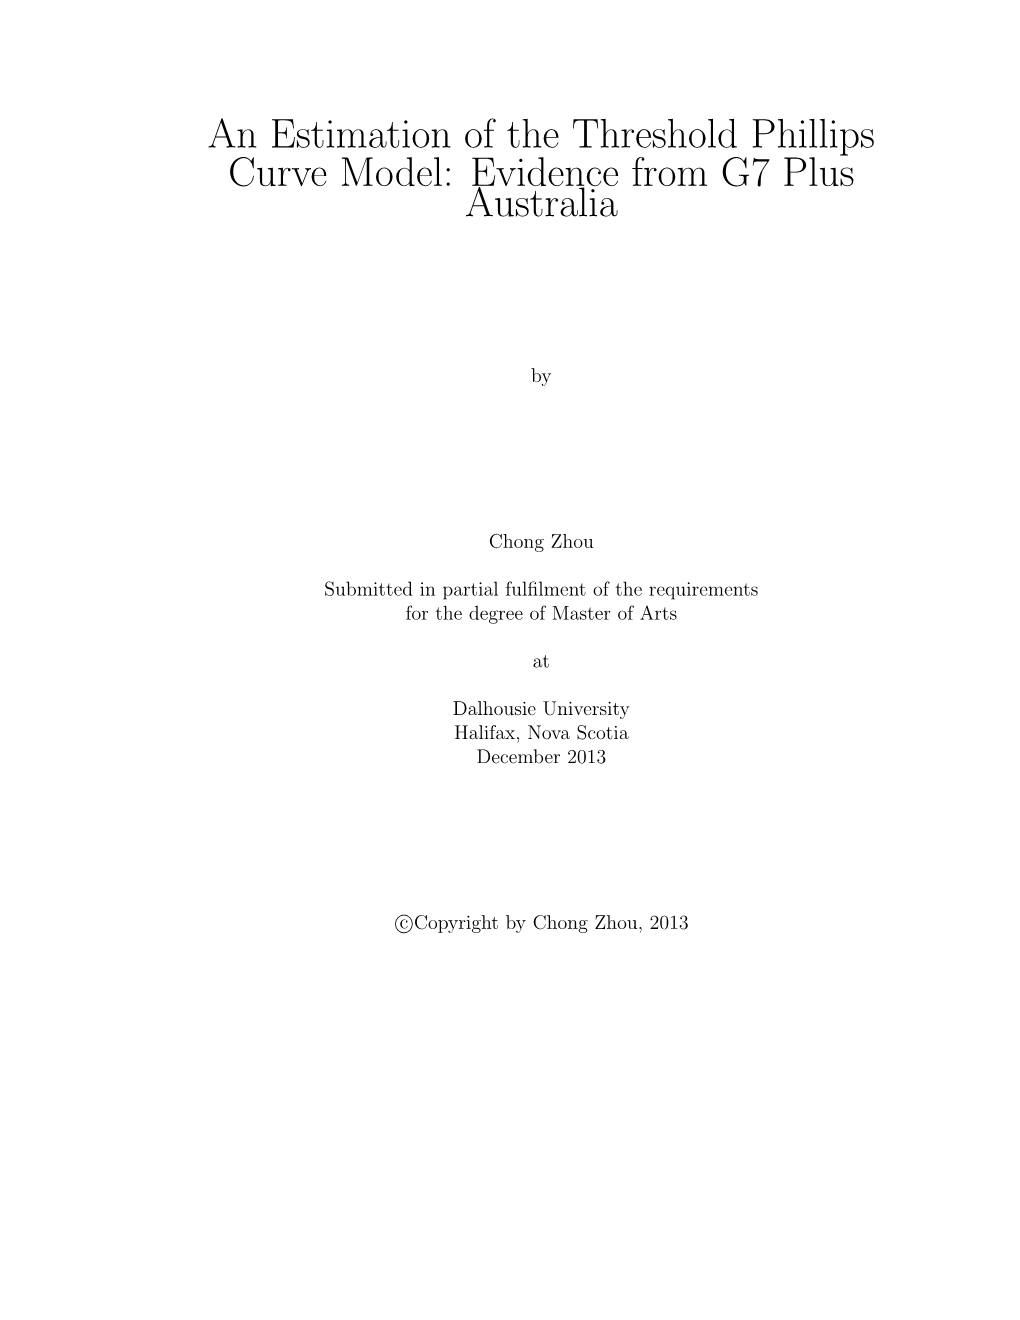 An Estimation of the Threshold Phillips Curve Model: Evidence from G7 Plus Australia